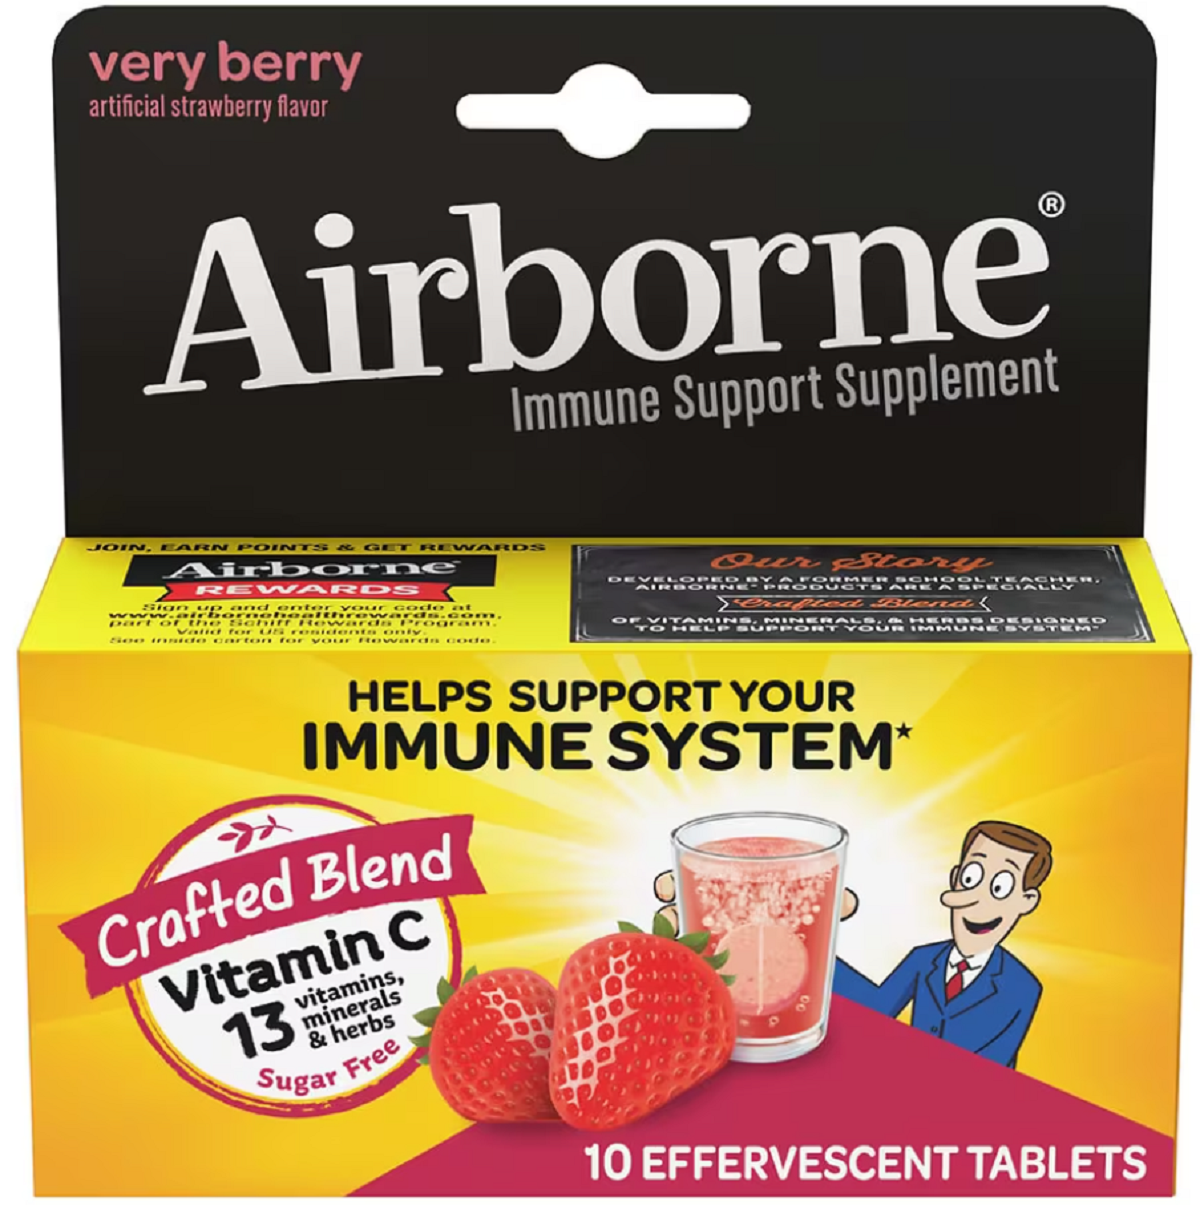 AirBorne Immune Support Supplement, Effervescent Tablets Verry Berry, Airborne Product Coupon